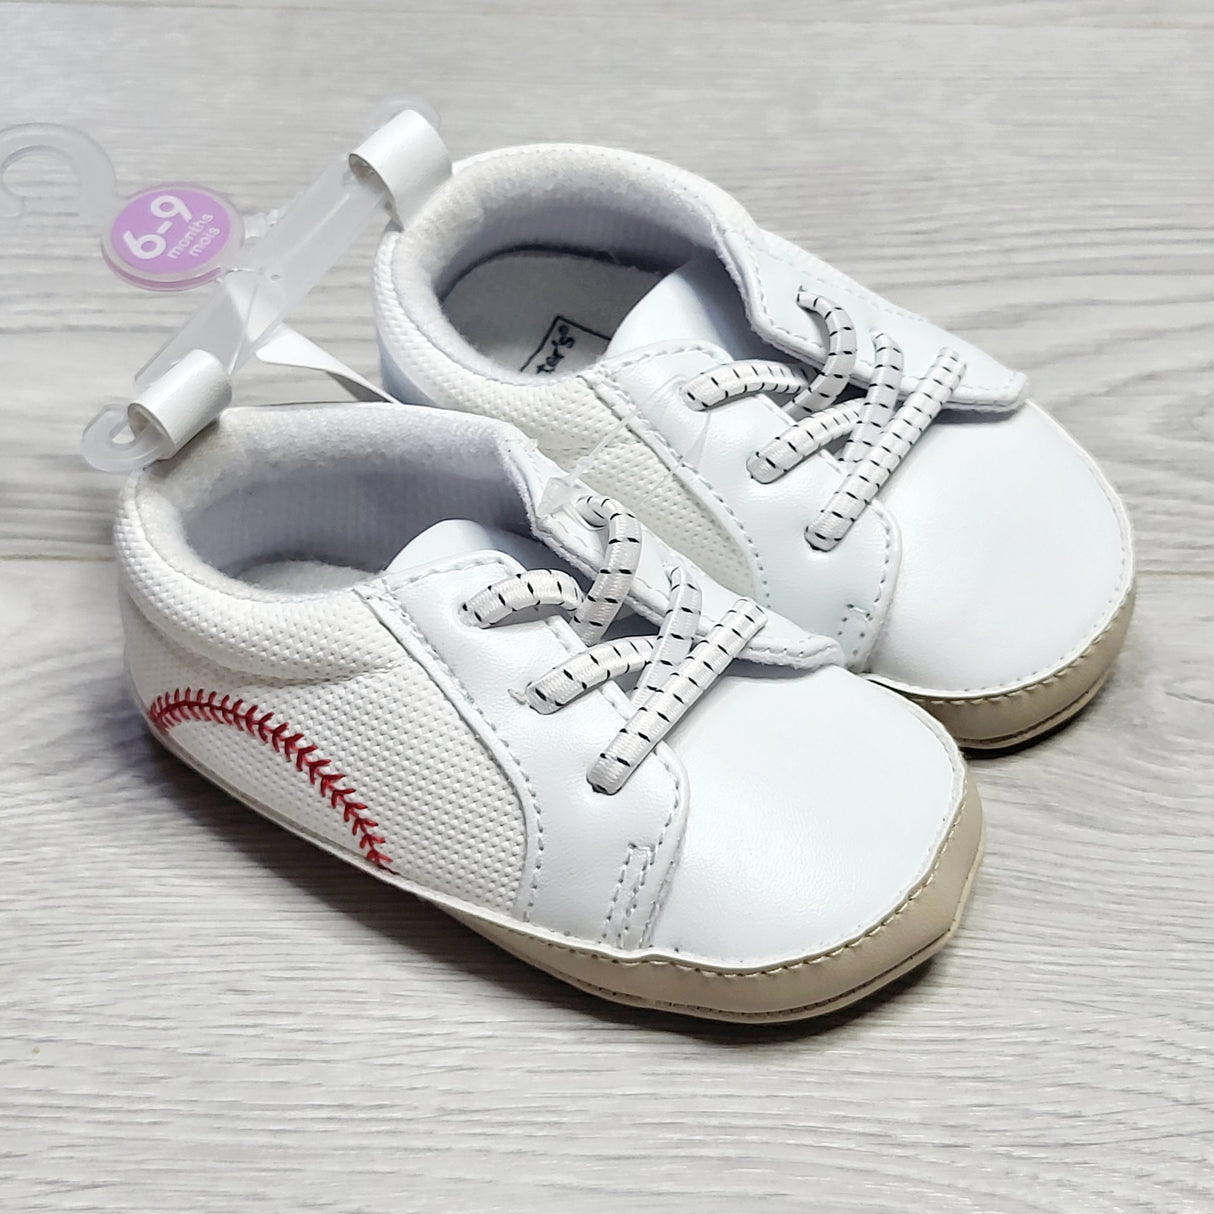 CRTH2 - NEW - Carters soft soled shoes with baseball stitching. Size 6-9 months